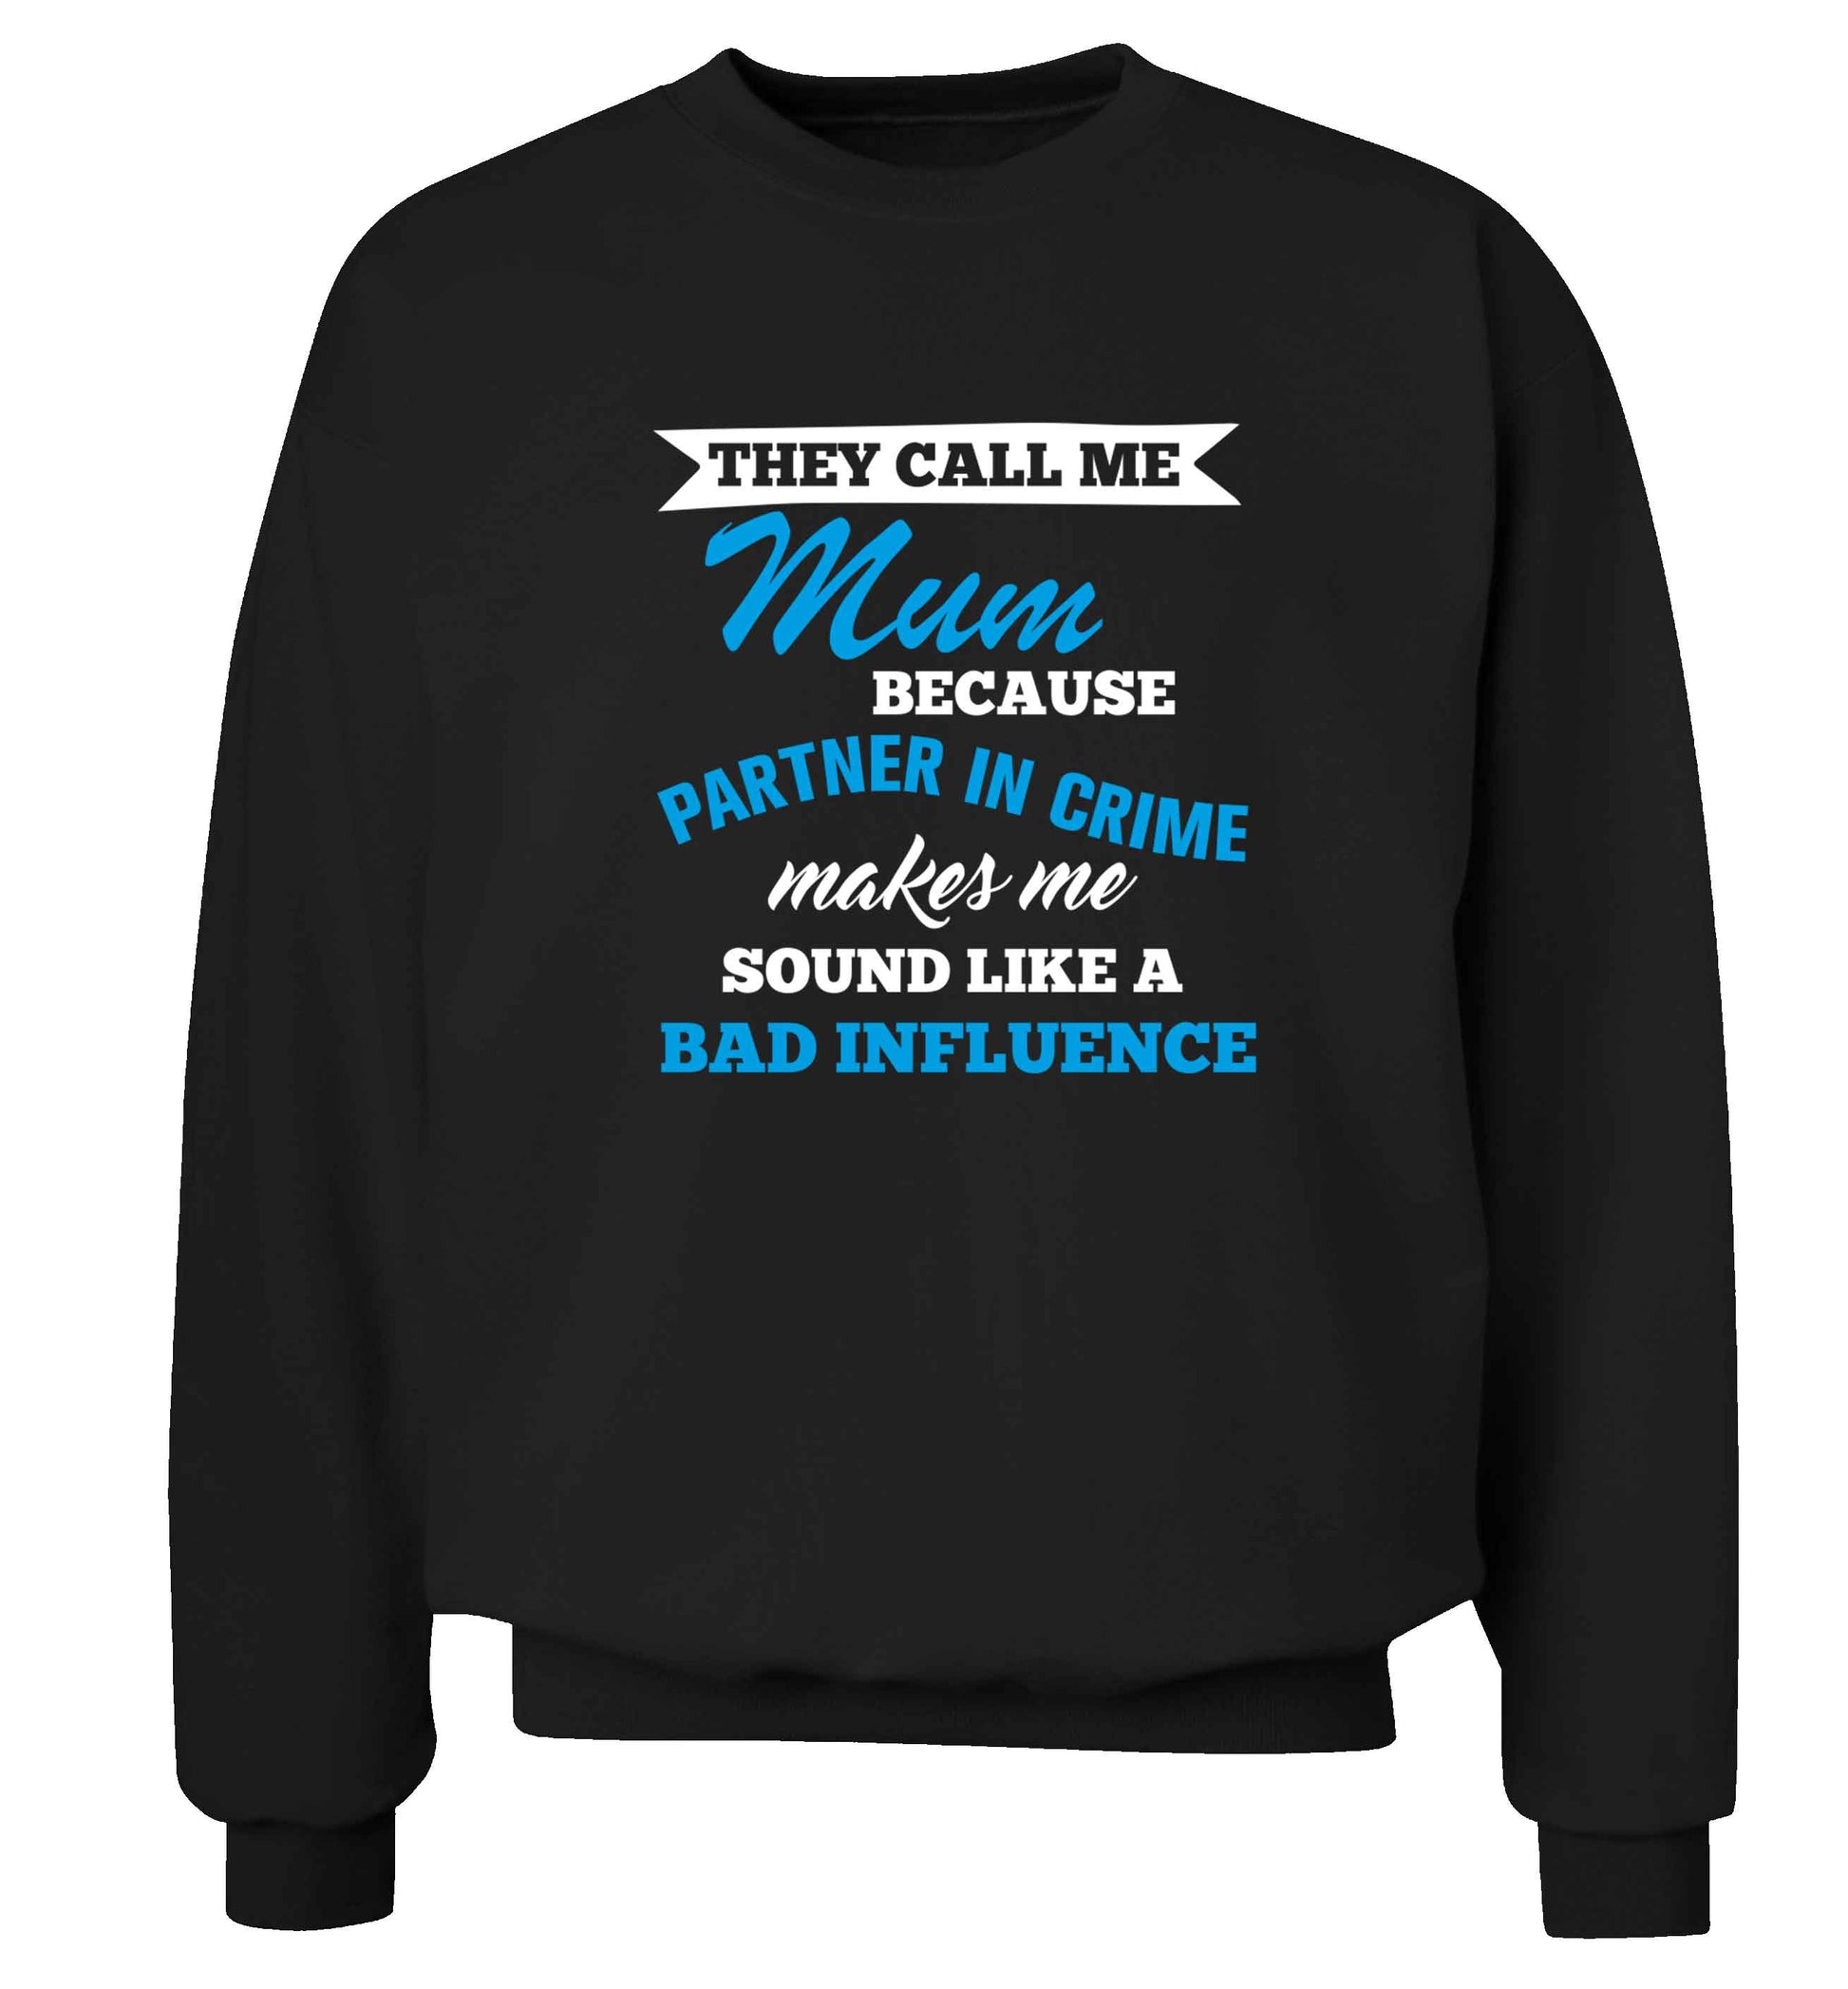 They call me mum because partner in crime makes me sound like a bad influence adult's unisex black sweater 2XL